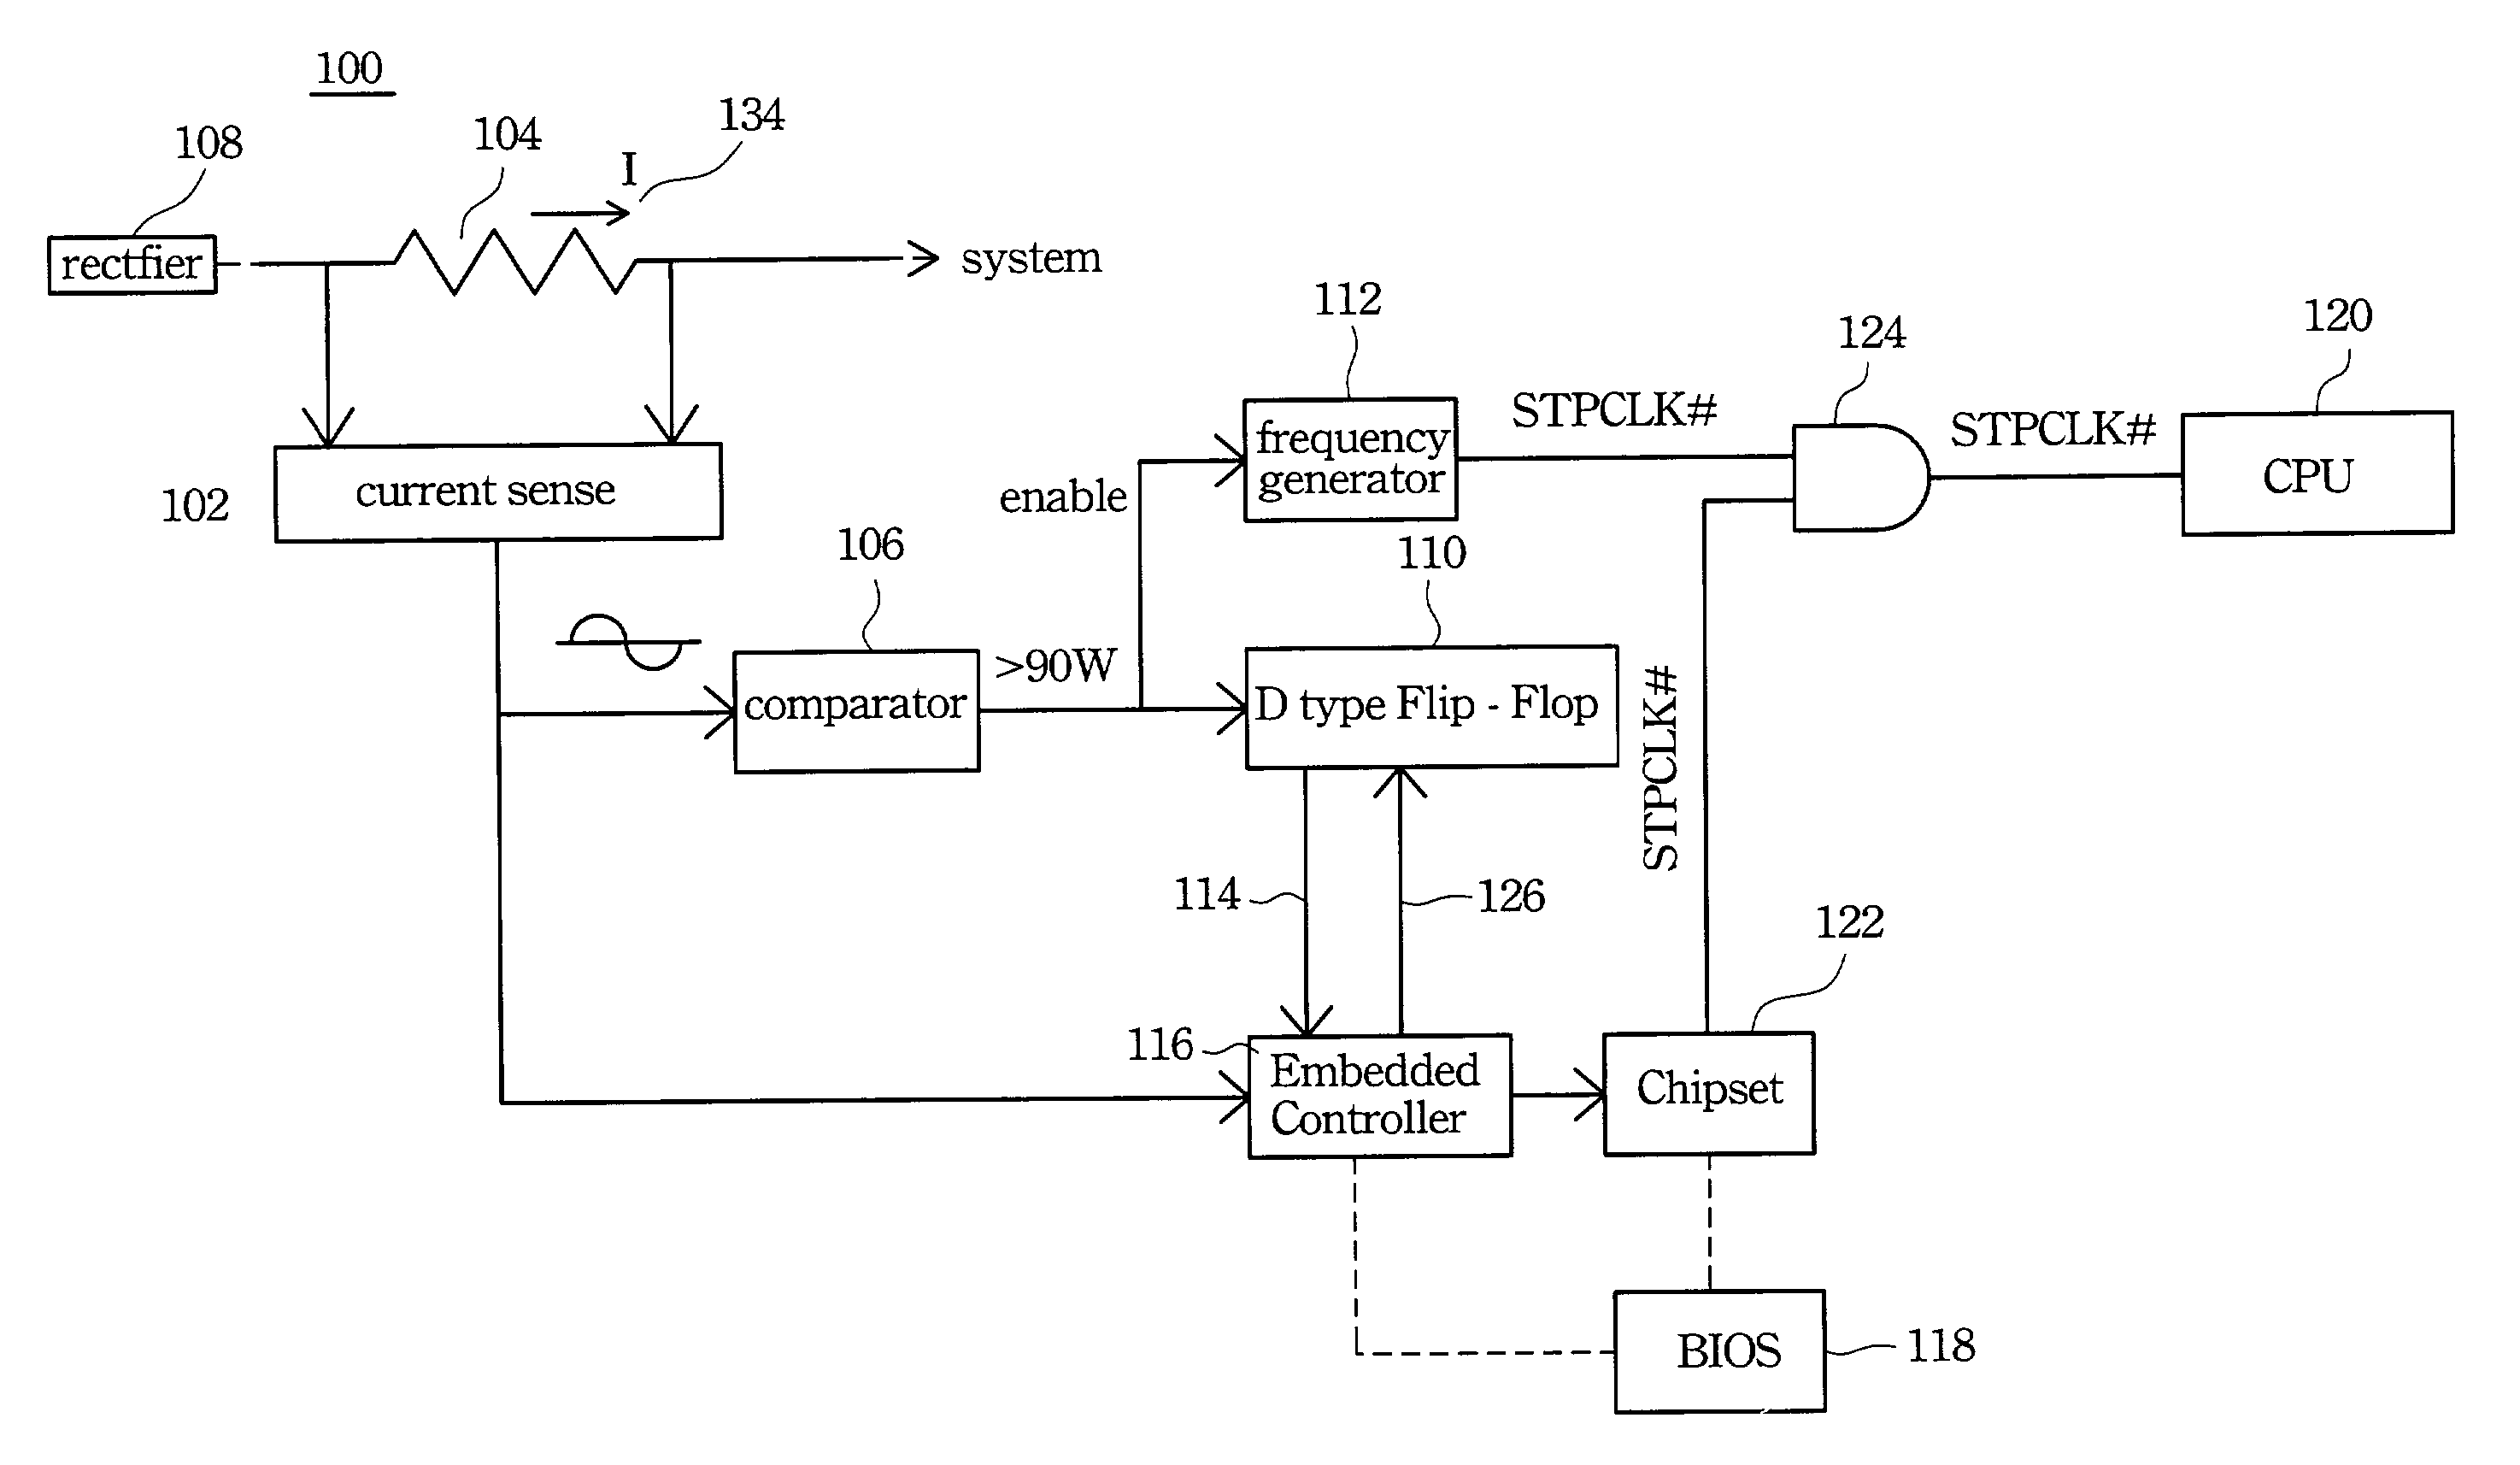 Apparatus for dynamically adjusting CPU power consumption